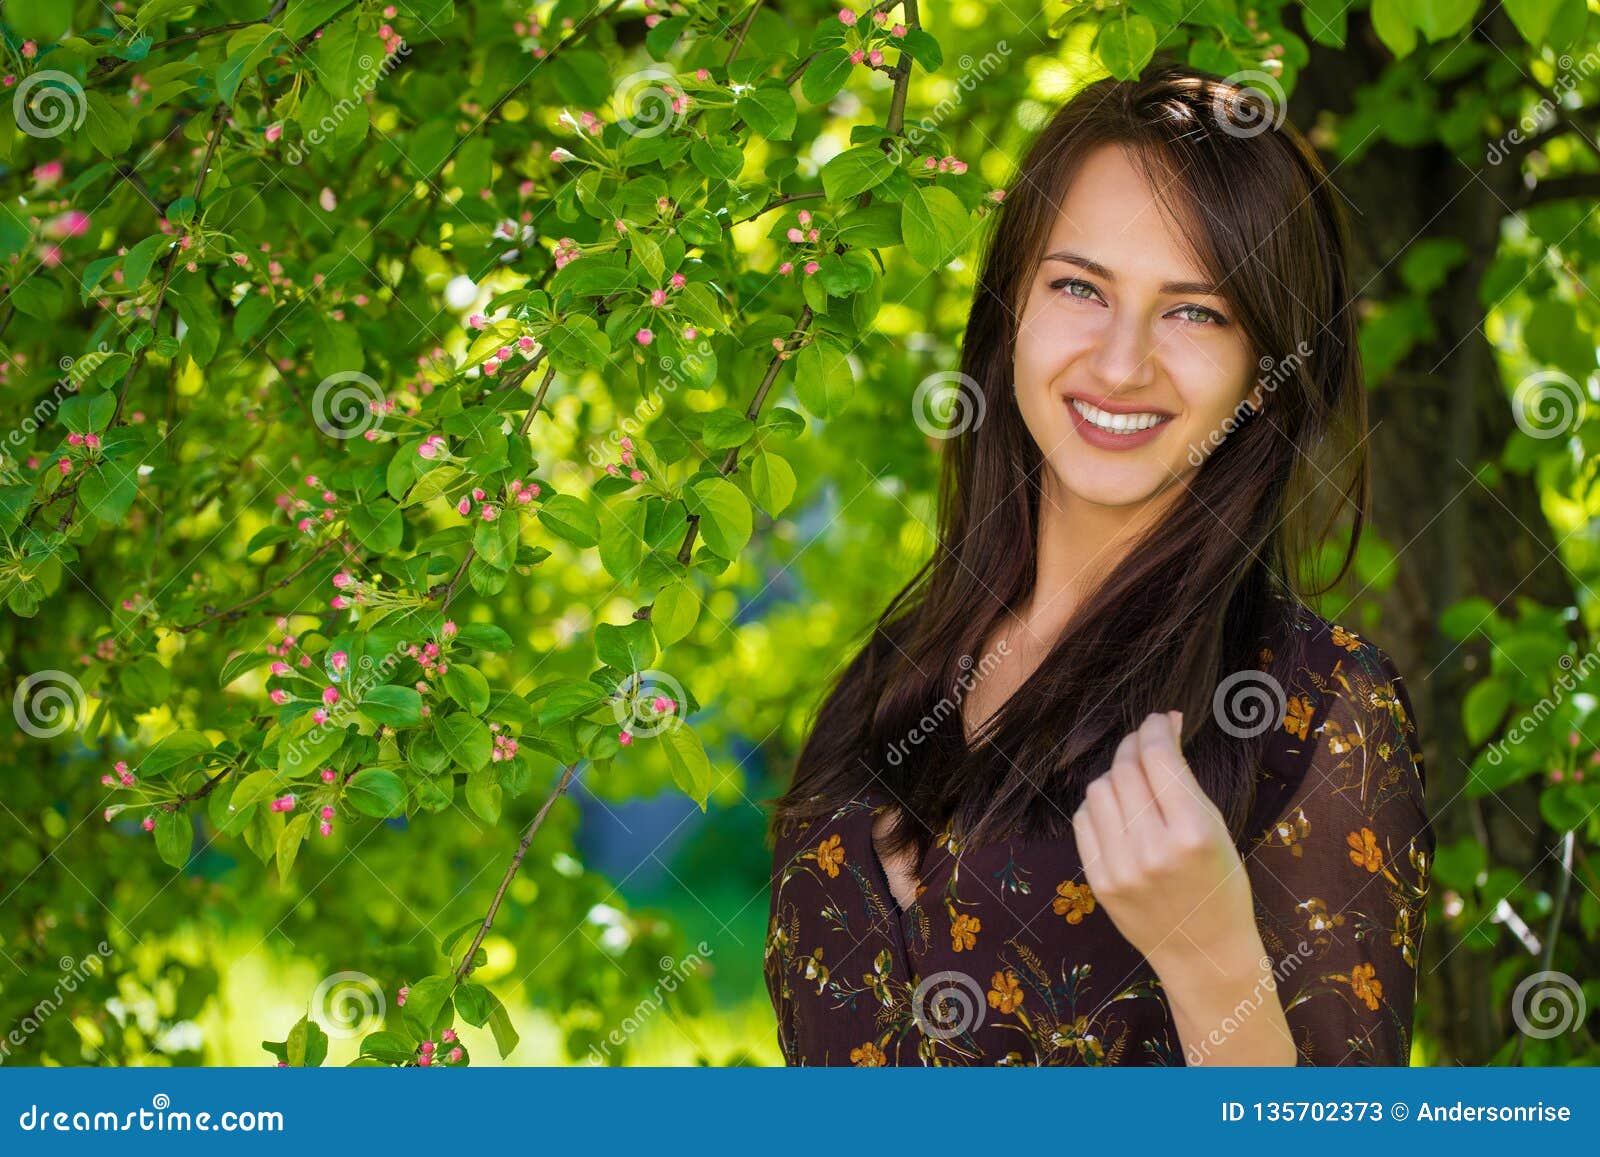 Portrait of Beautiful Young Happy Woman Stock Image - Image of girl ...